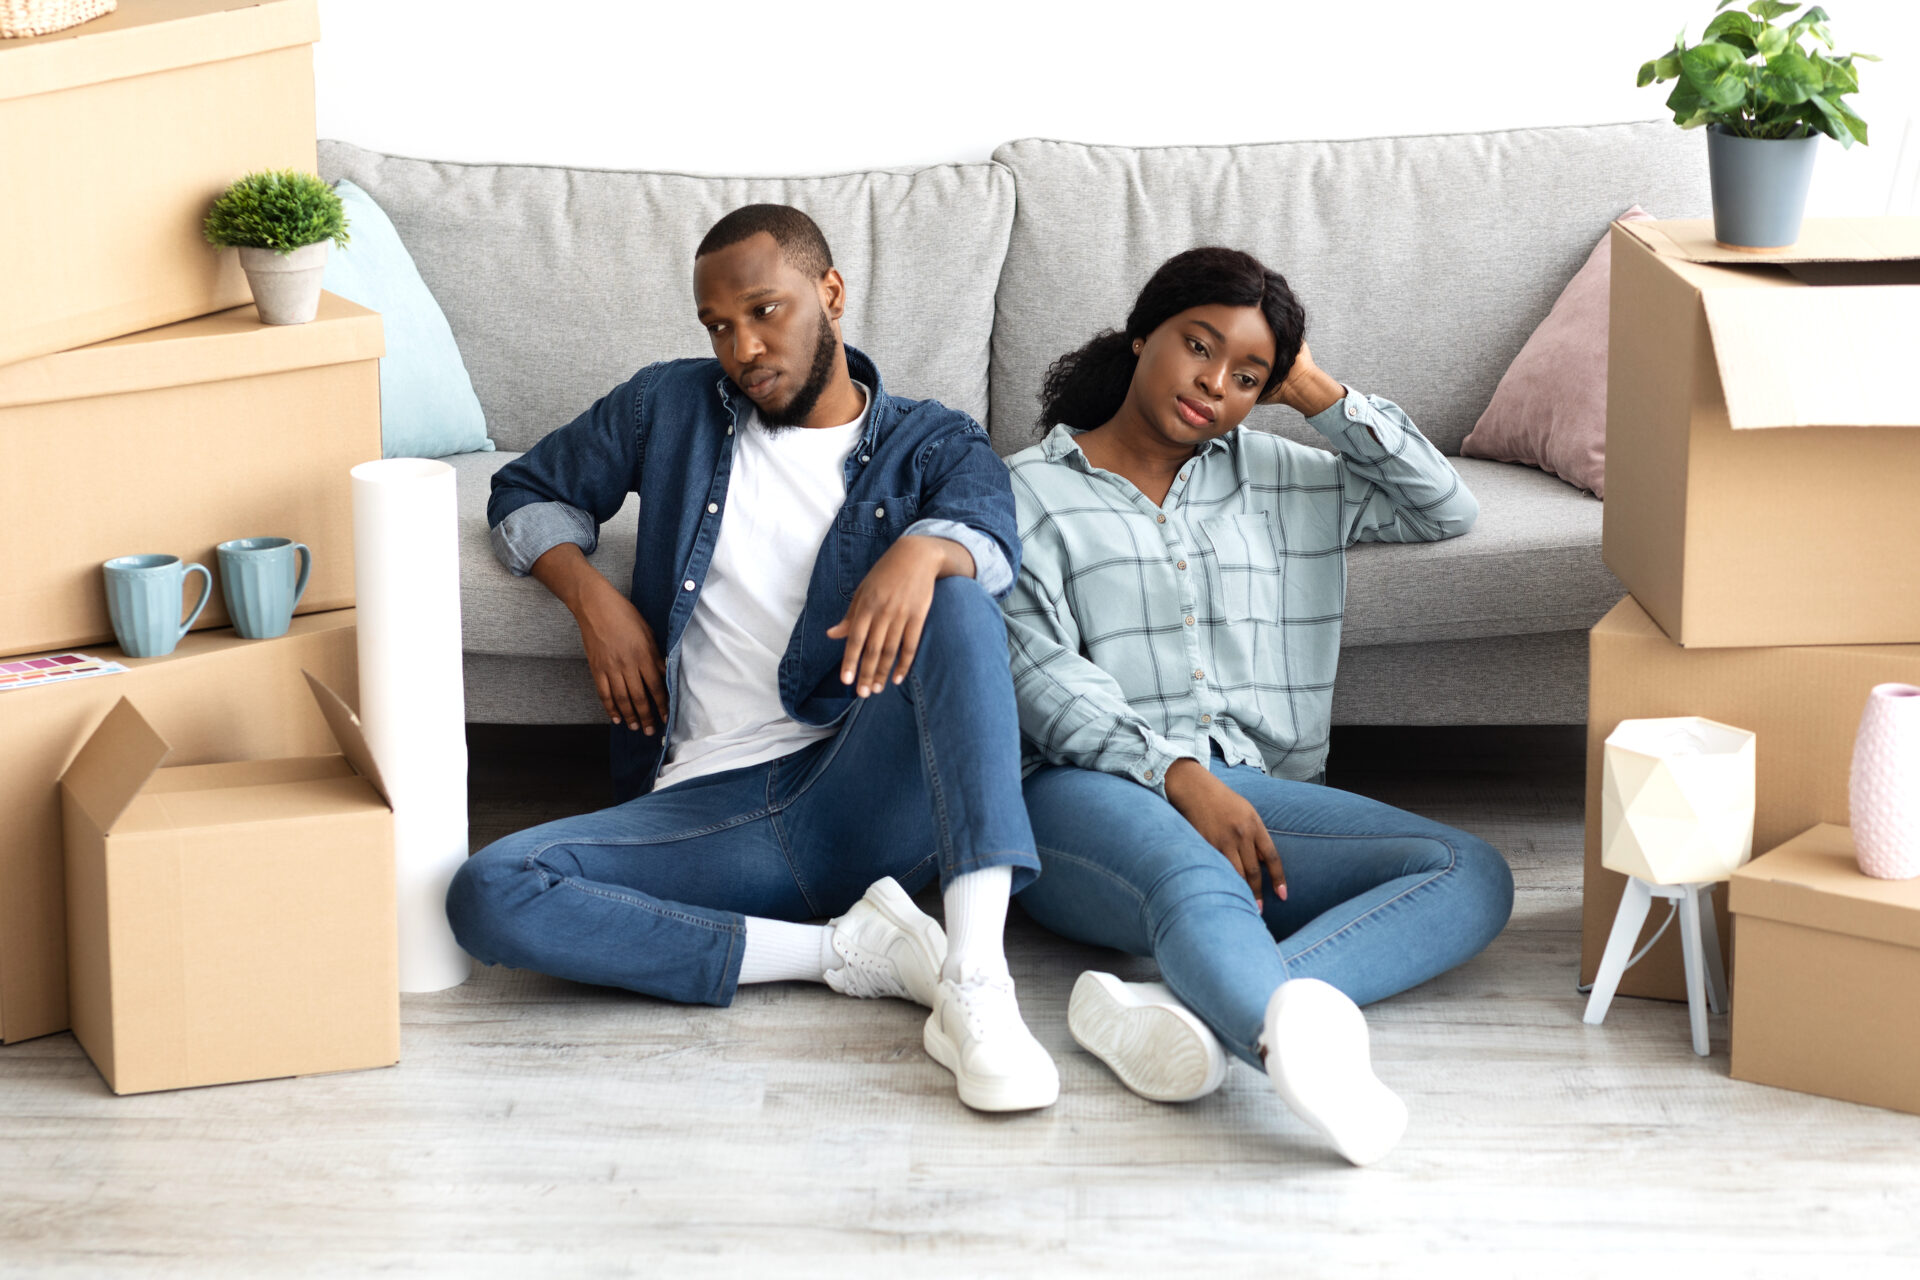 Portrait Of Tired Black Couple Sitting On Floor Exhausted After Moving To New Apartment